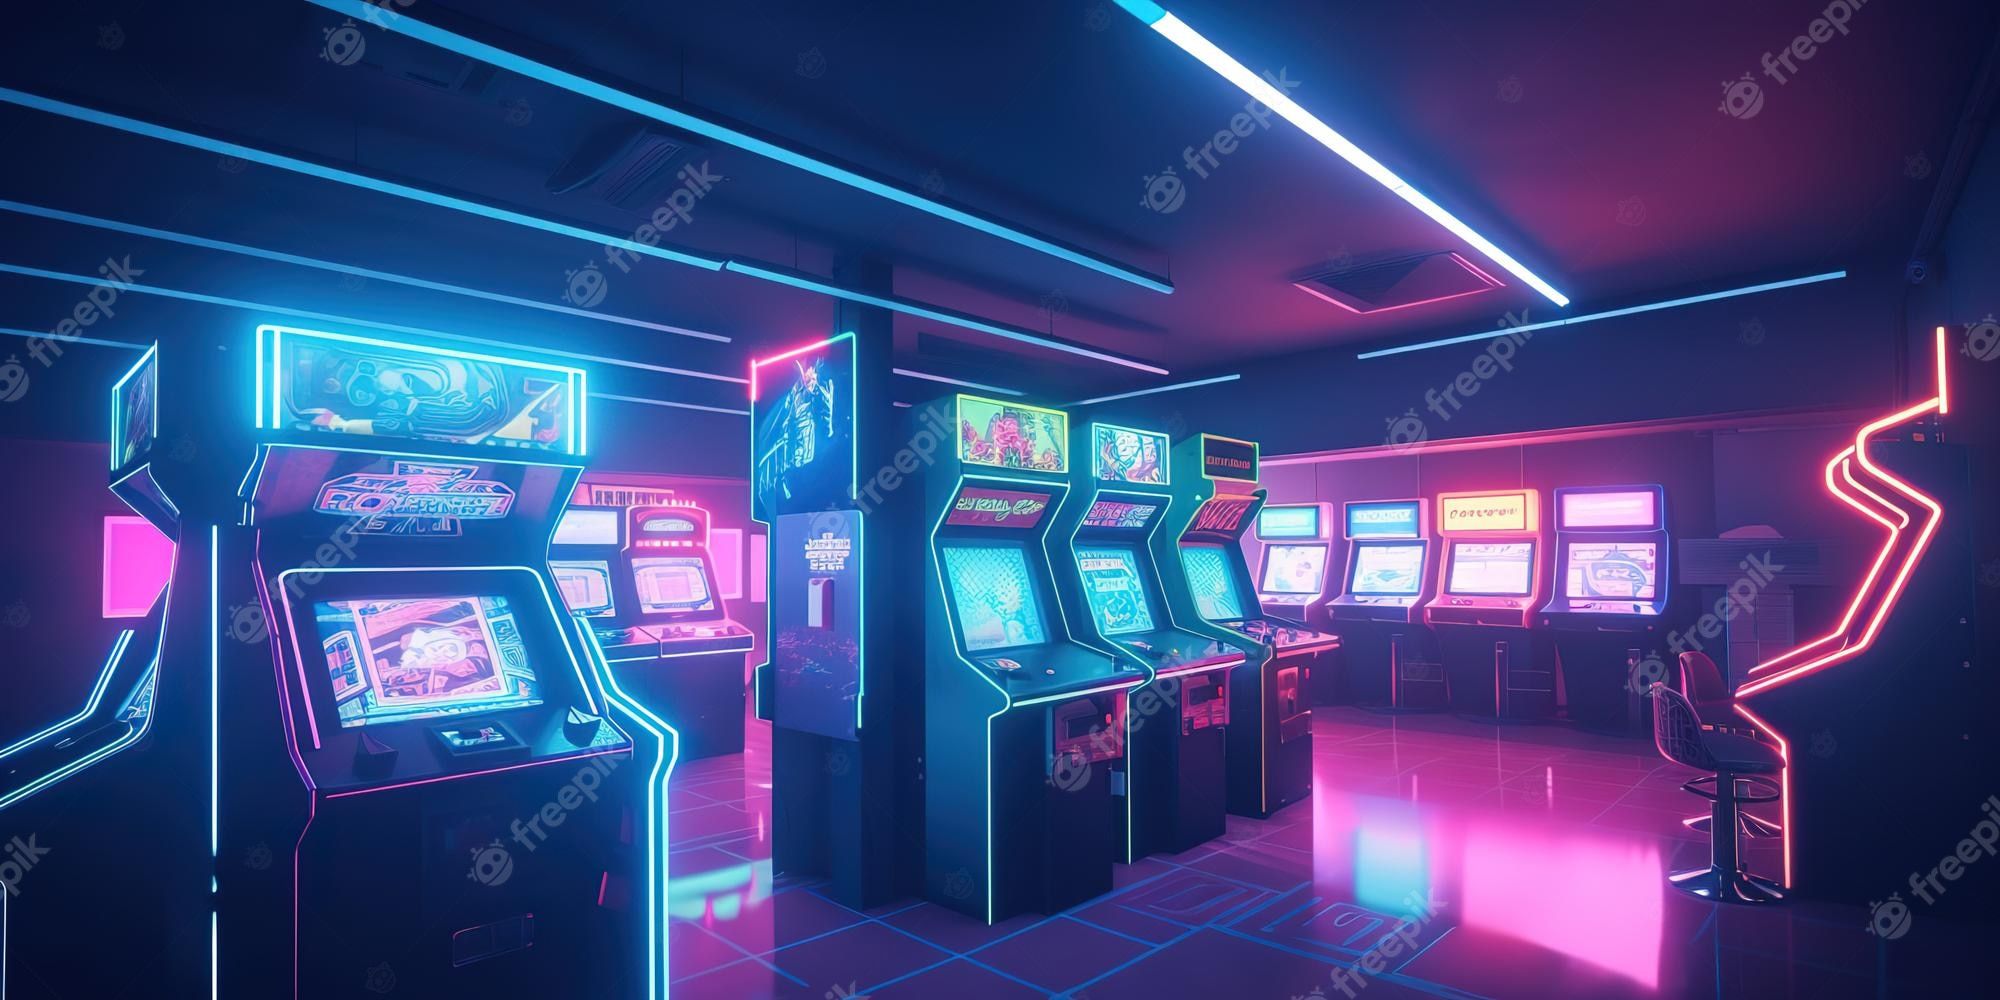 A room with old vintage arcade machines with glowing blue and pink lights - Arcade